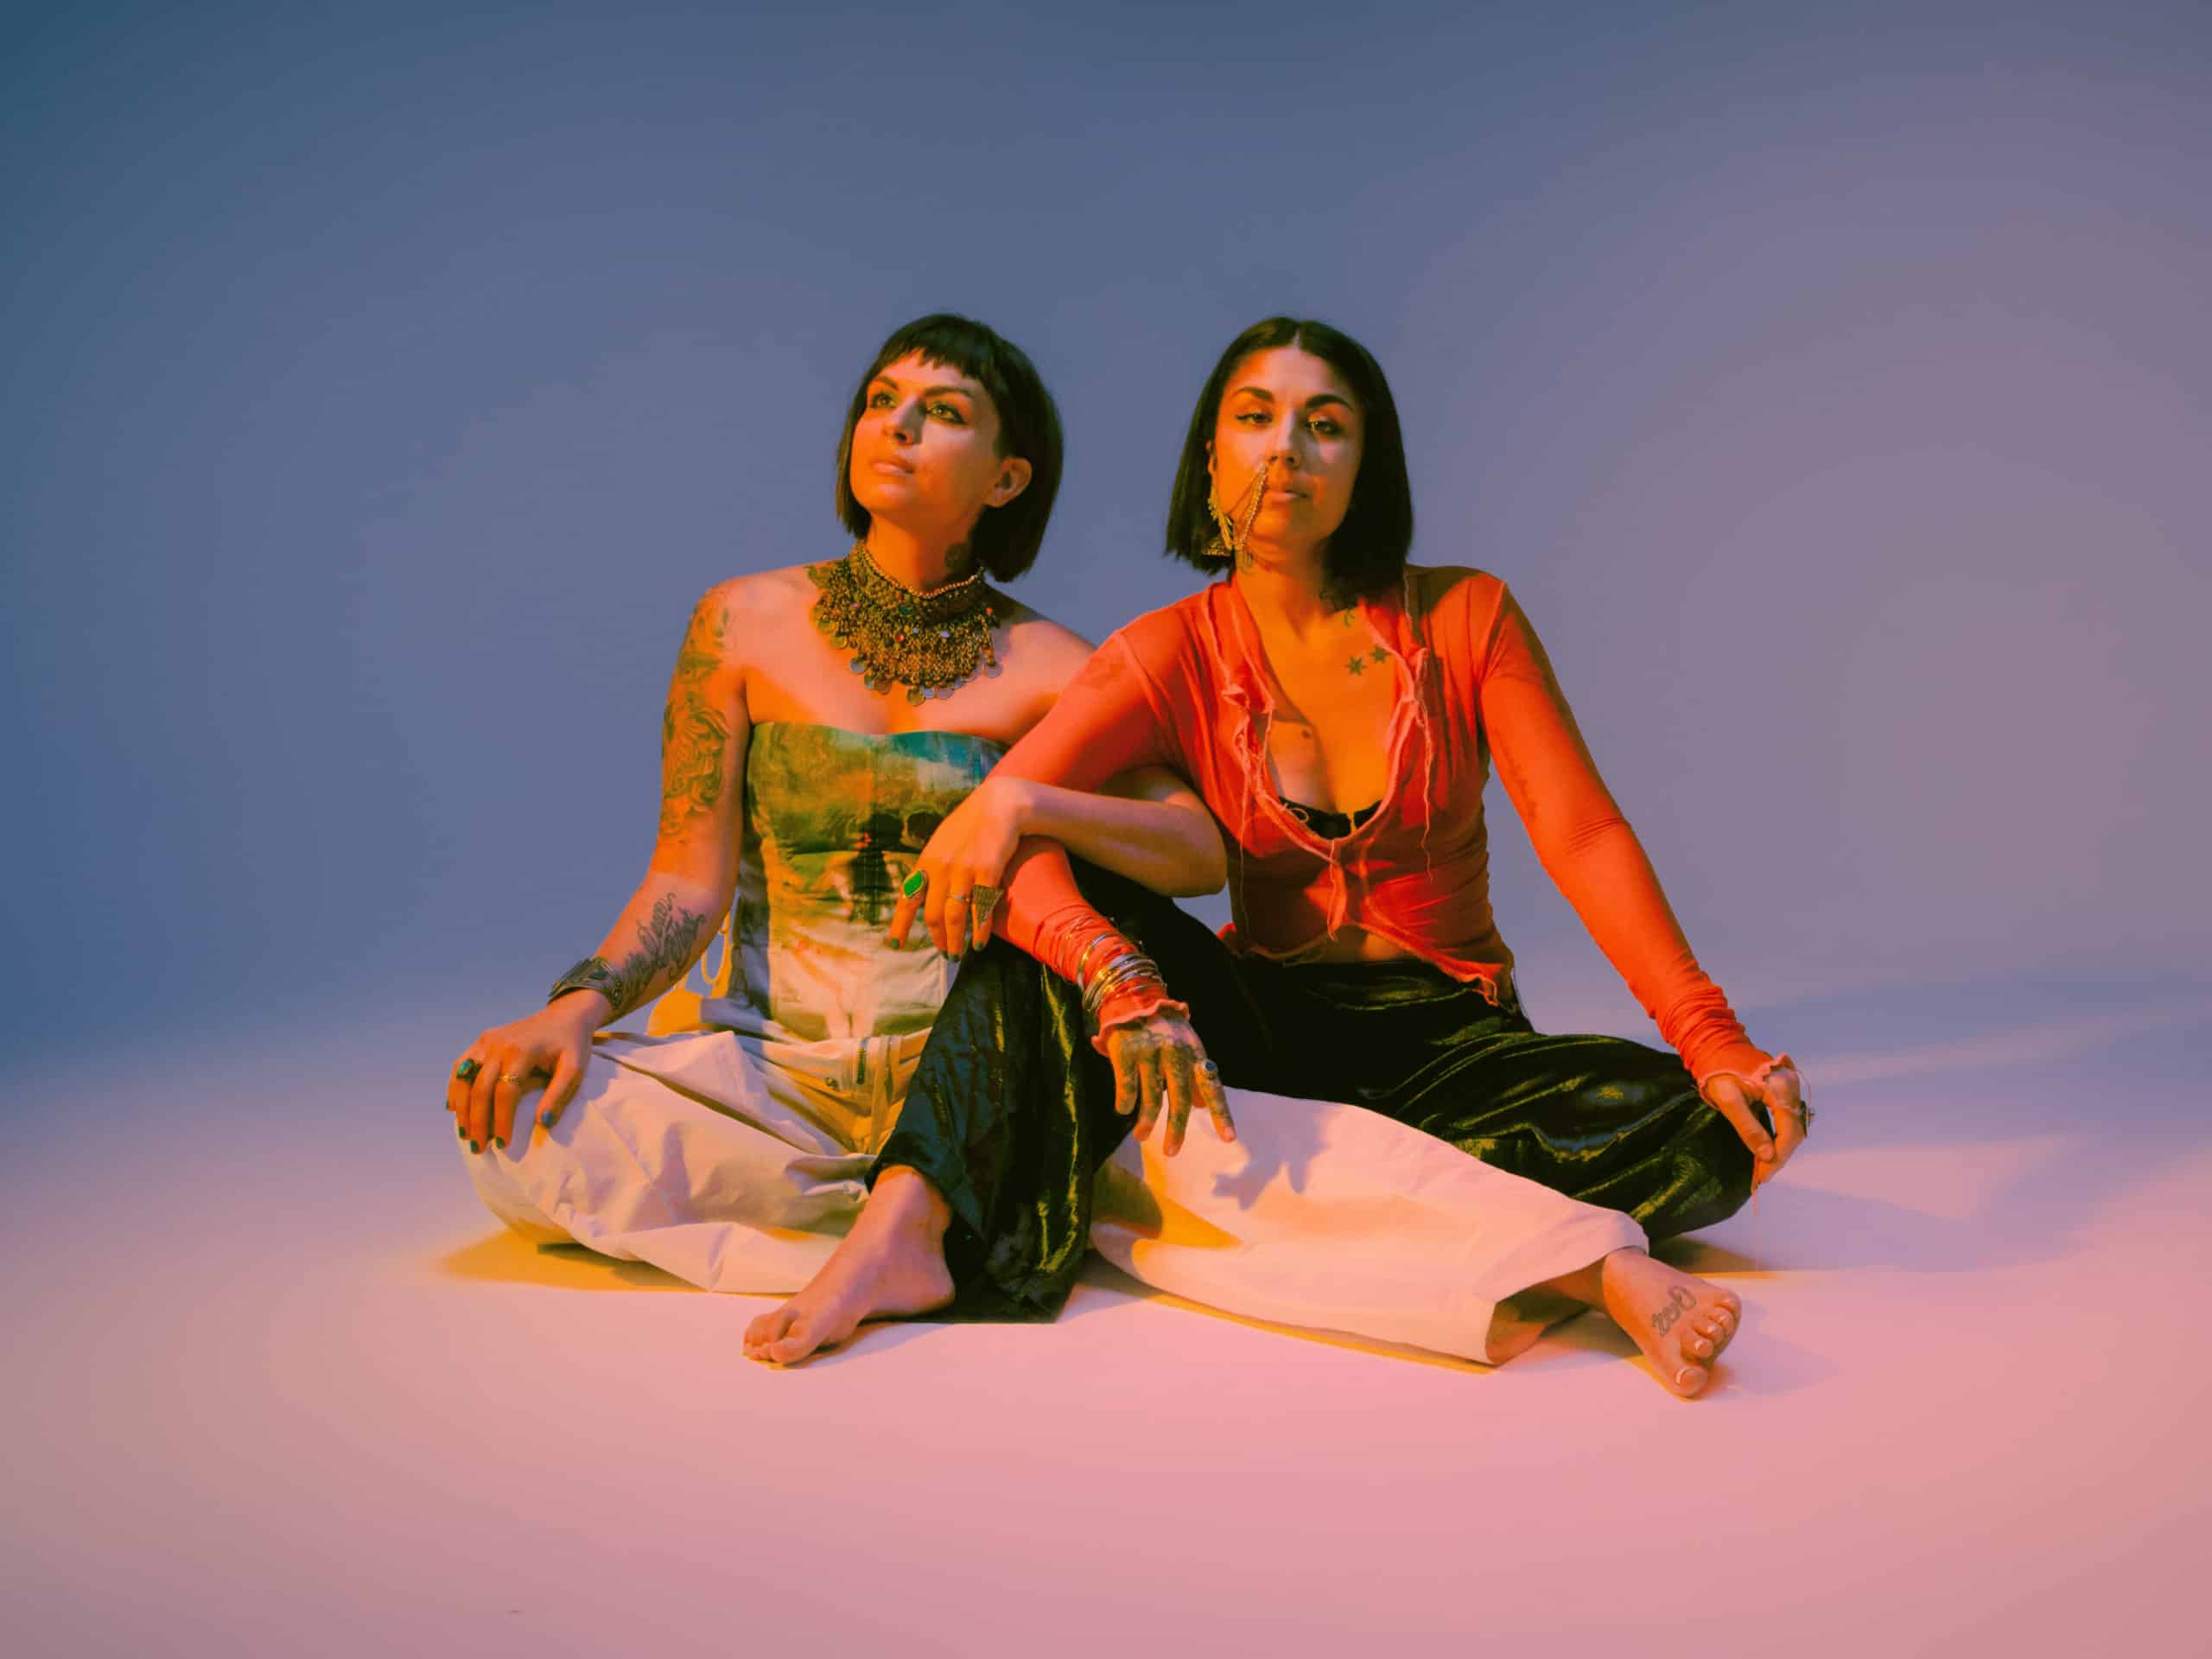 Krewella continues their Goddess level status as they team up with BEAUZ for "Never Been Hurt:" Listen